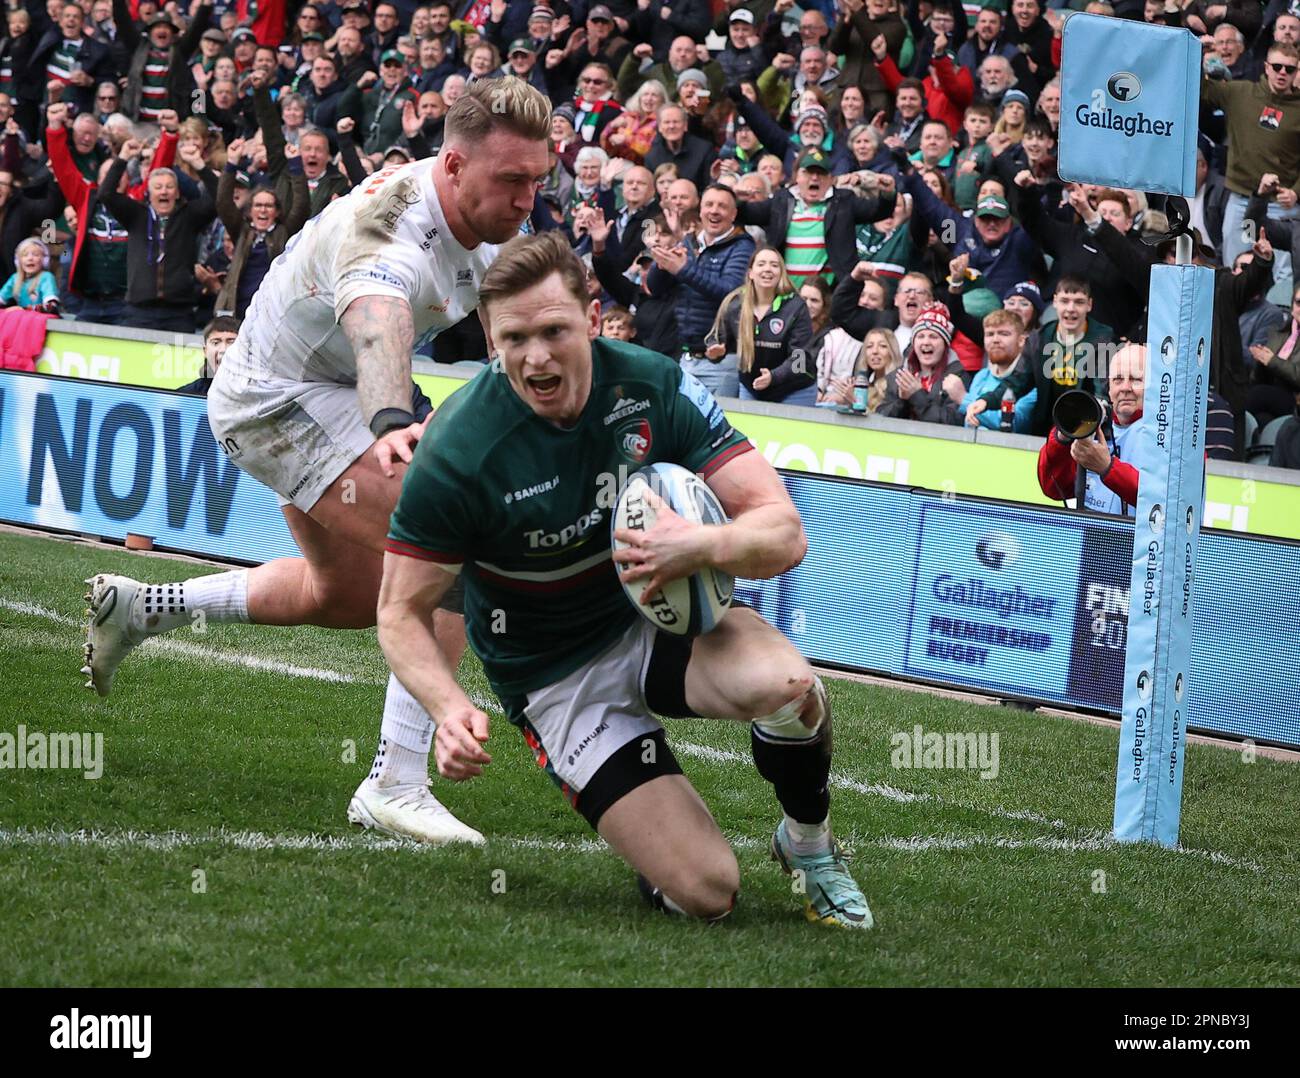 16.04.2023   Leicester, England. Rugby Union.                   Chris Ashton scores his 100th try (a Premiership record) during the Gallagher Premiership match played between Leicester Tigers and Exeter Chiefs at the Mattioli Woods Welford Road Stadium, Leicester.  © Phil Hutchinson Stock Photo